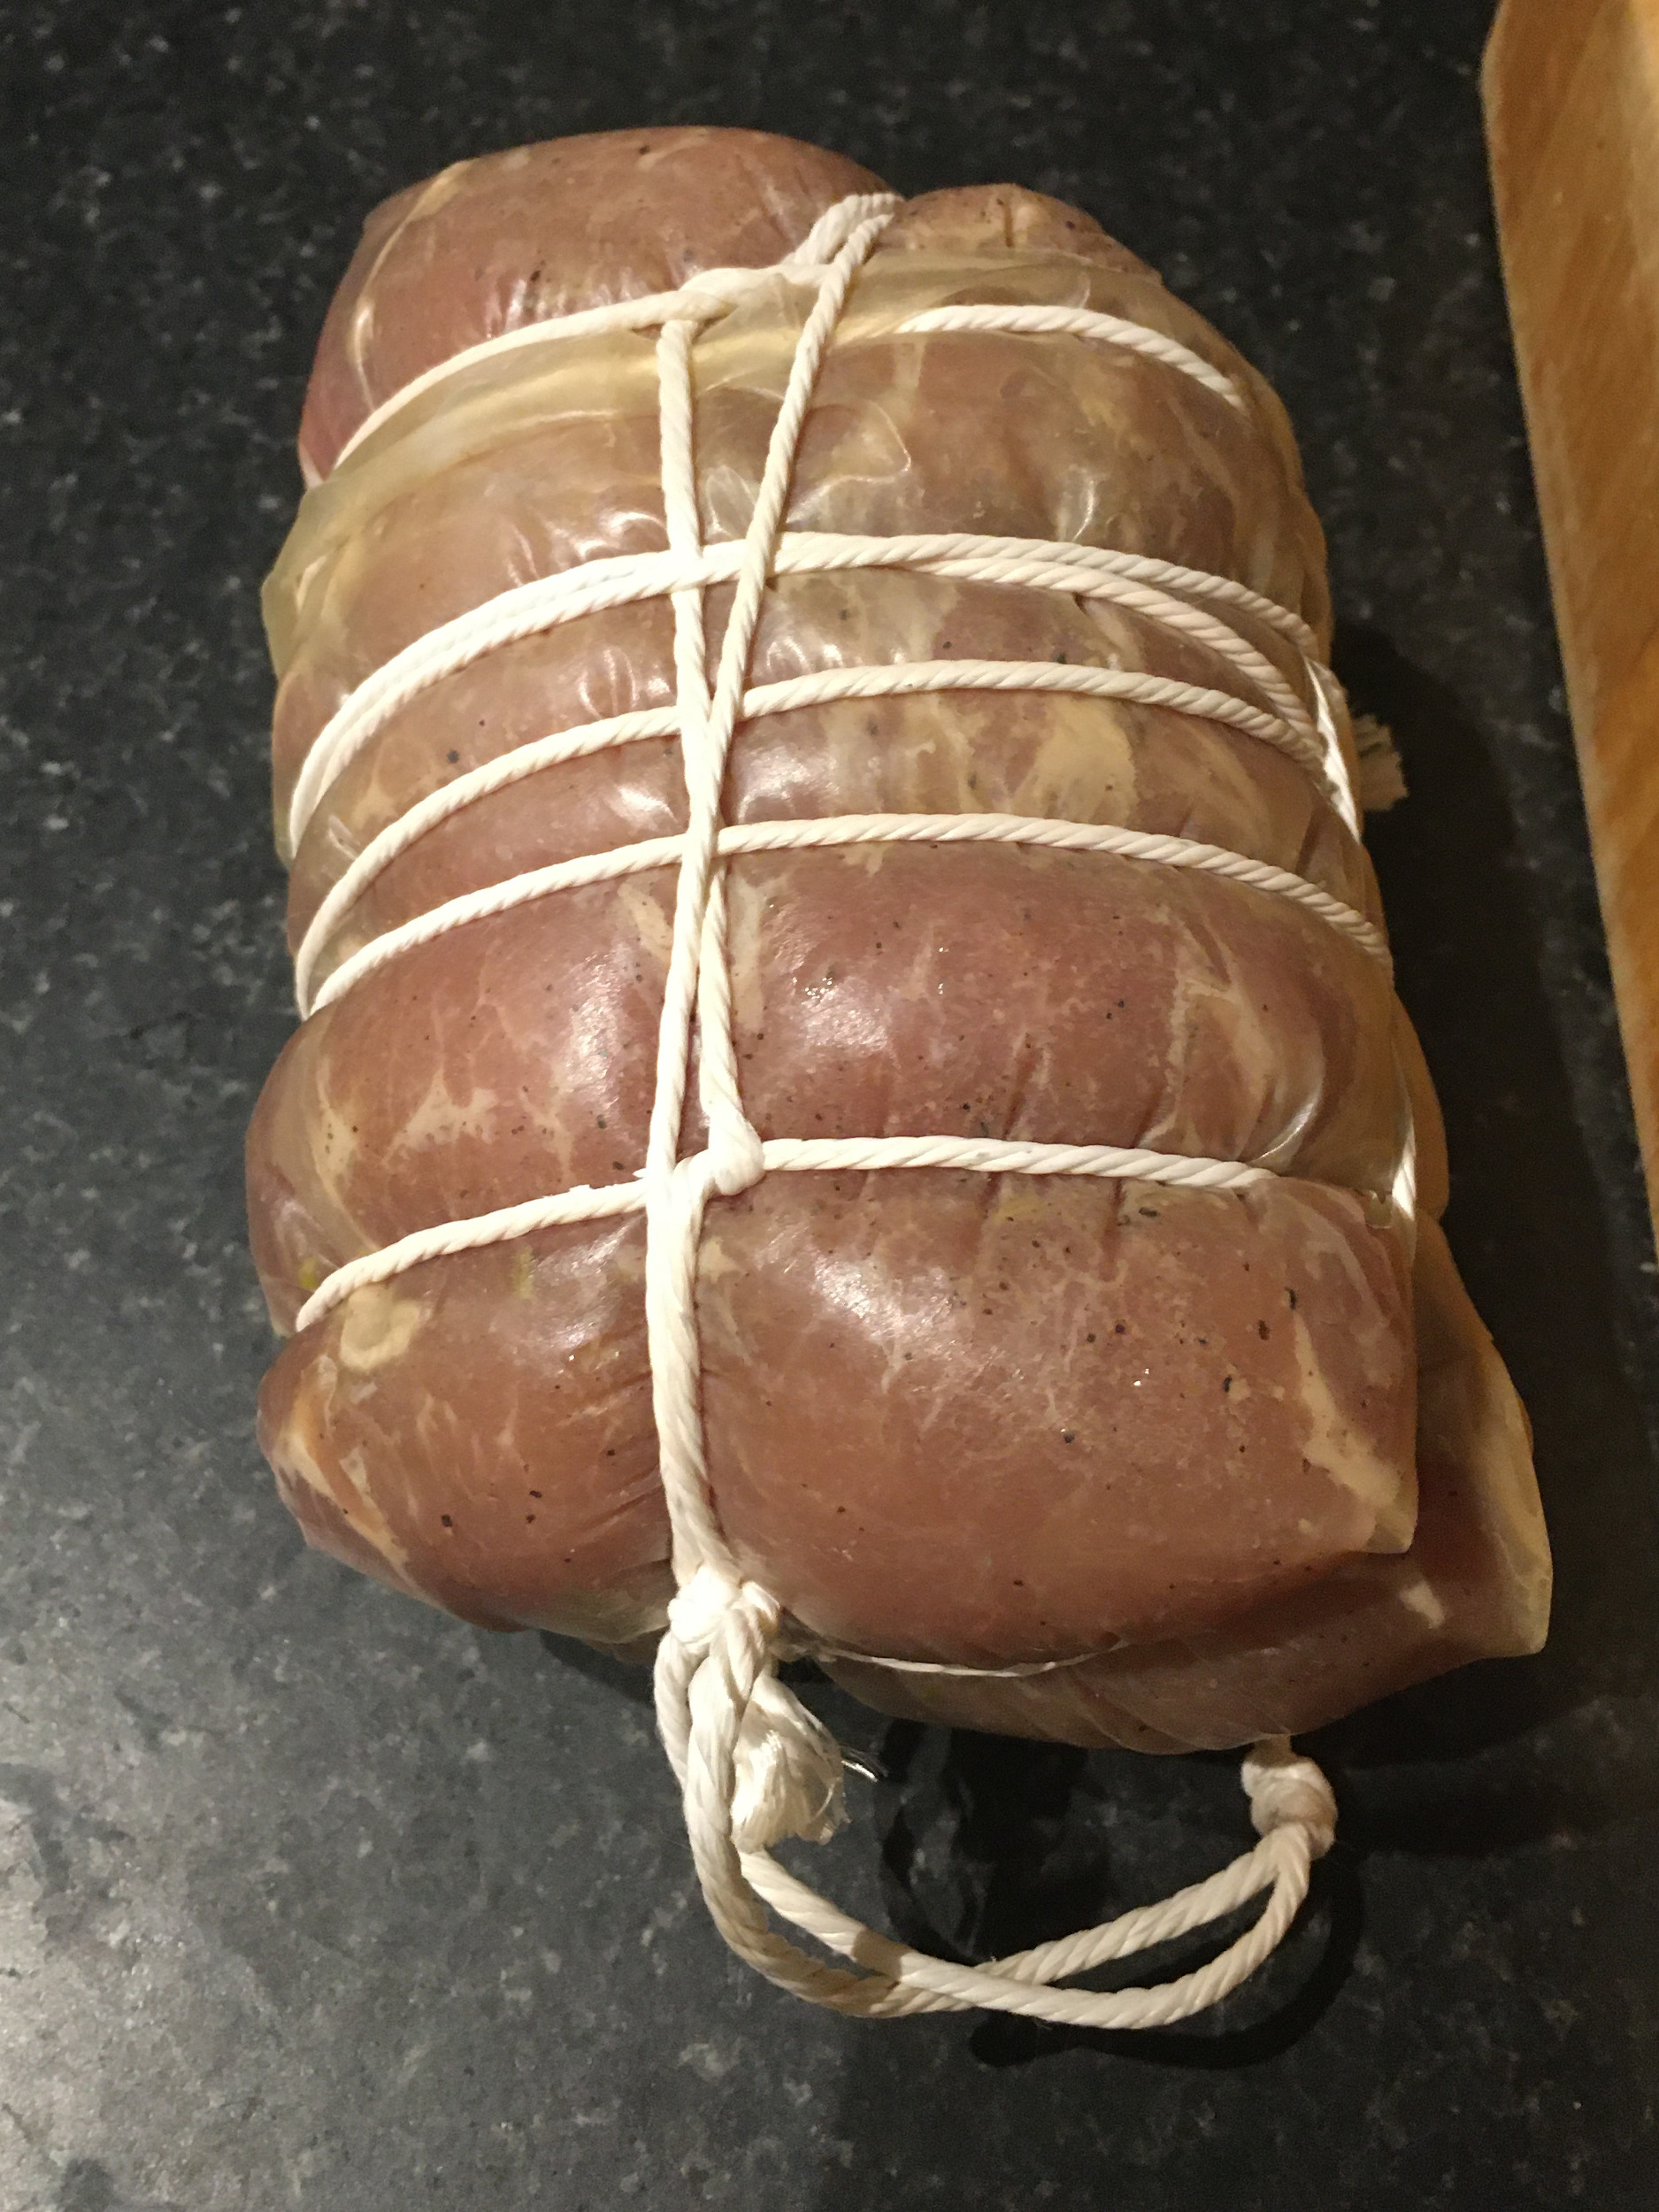 Pork tied in a casing ready for drying